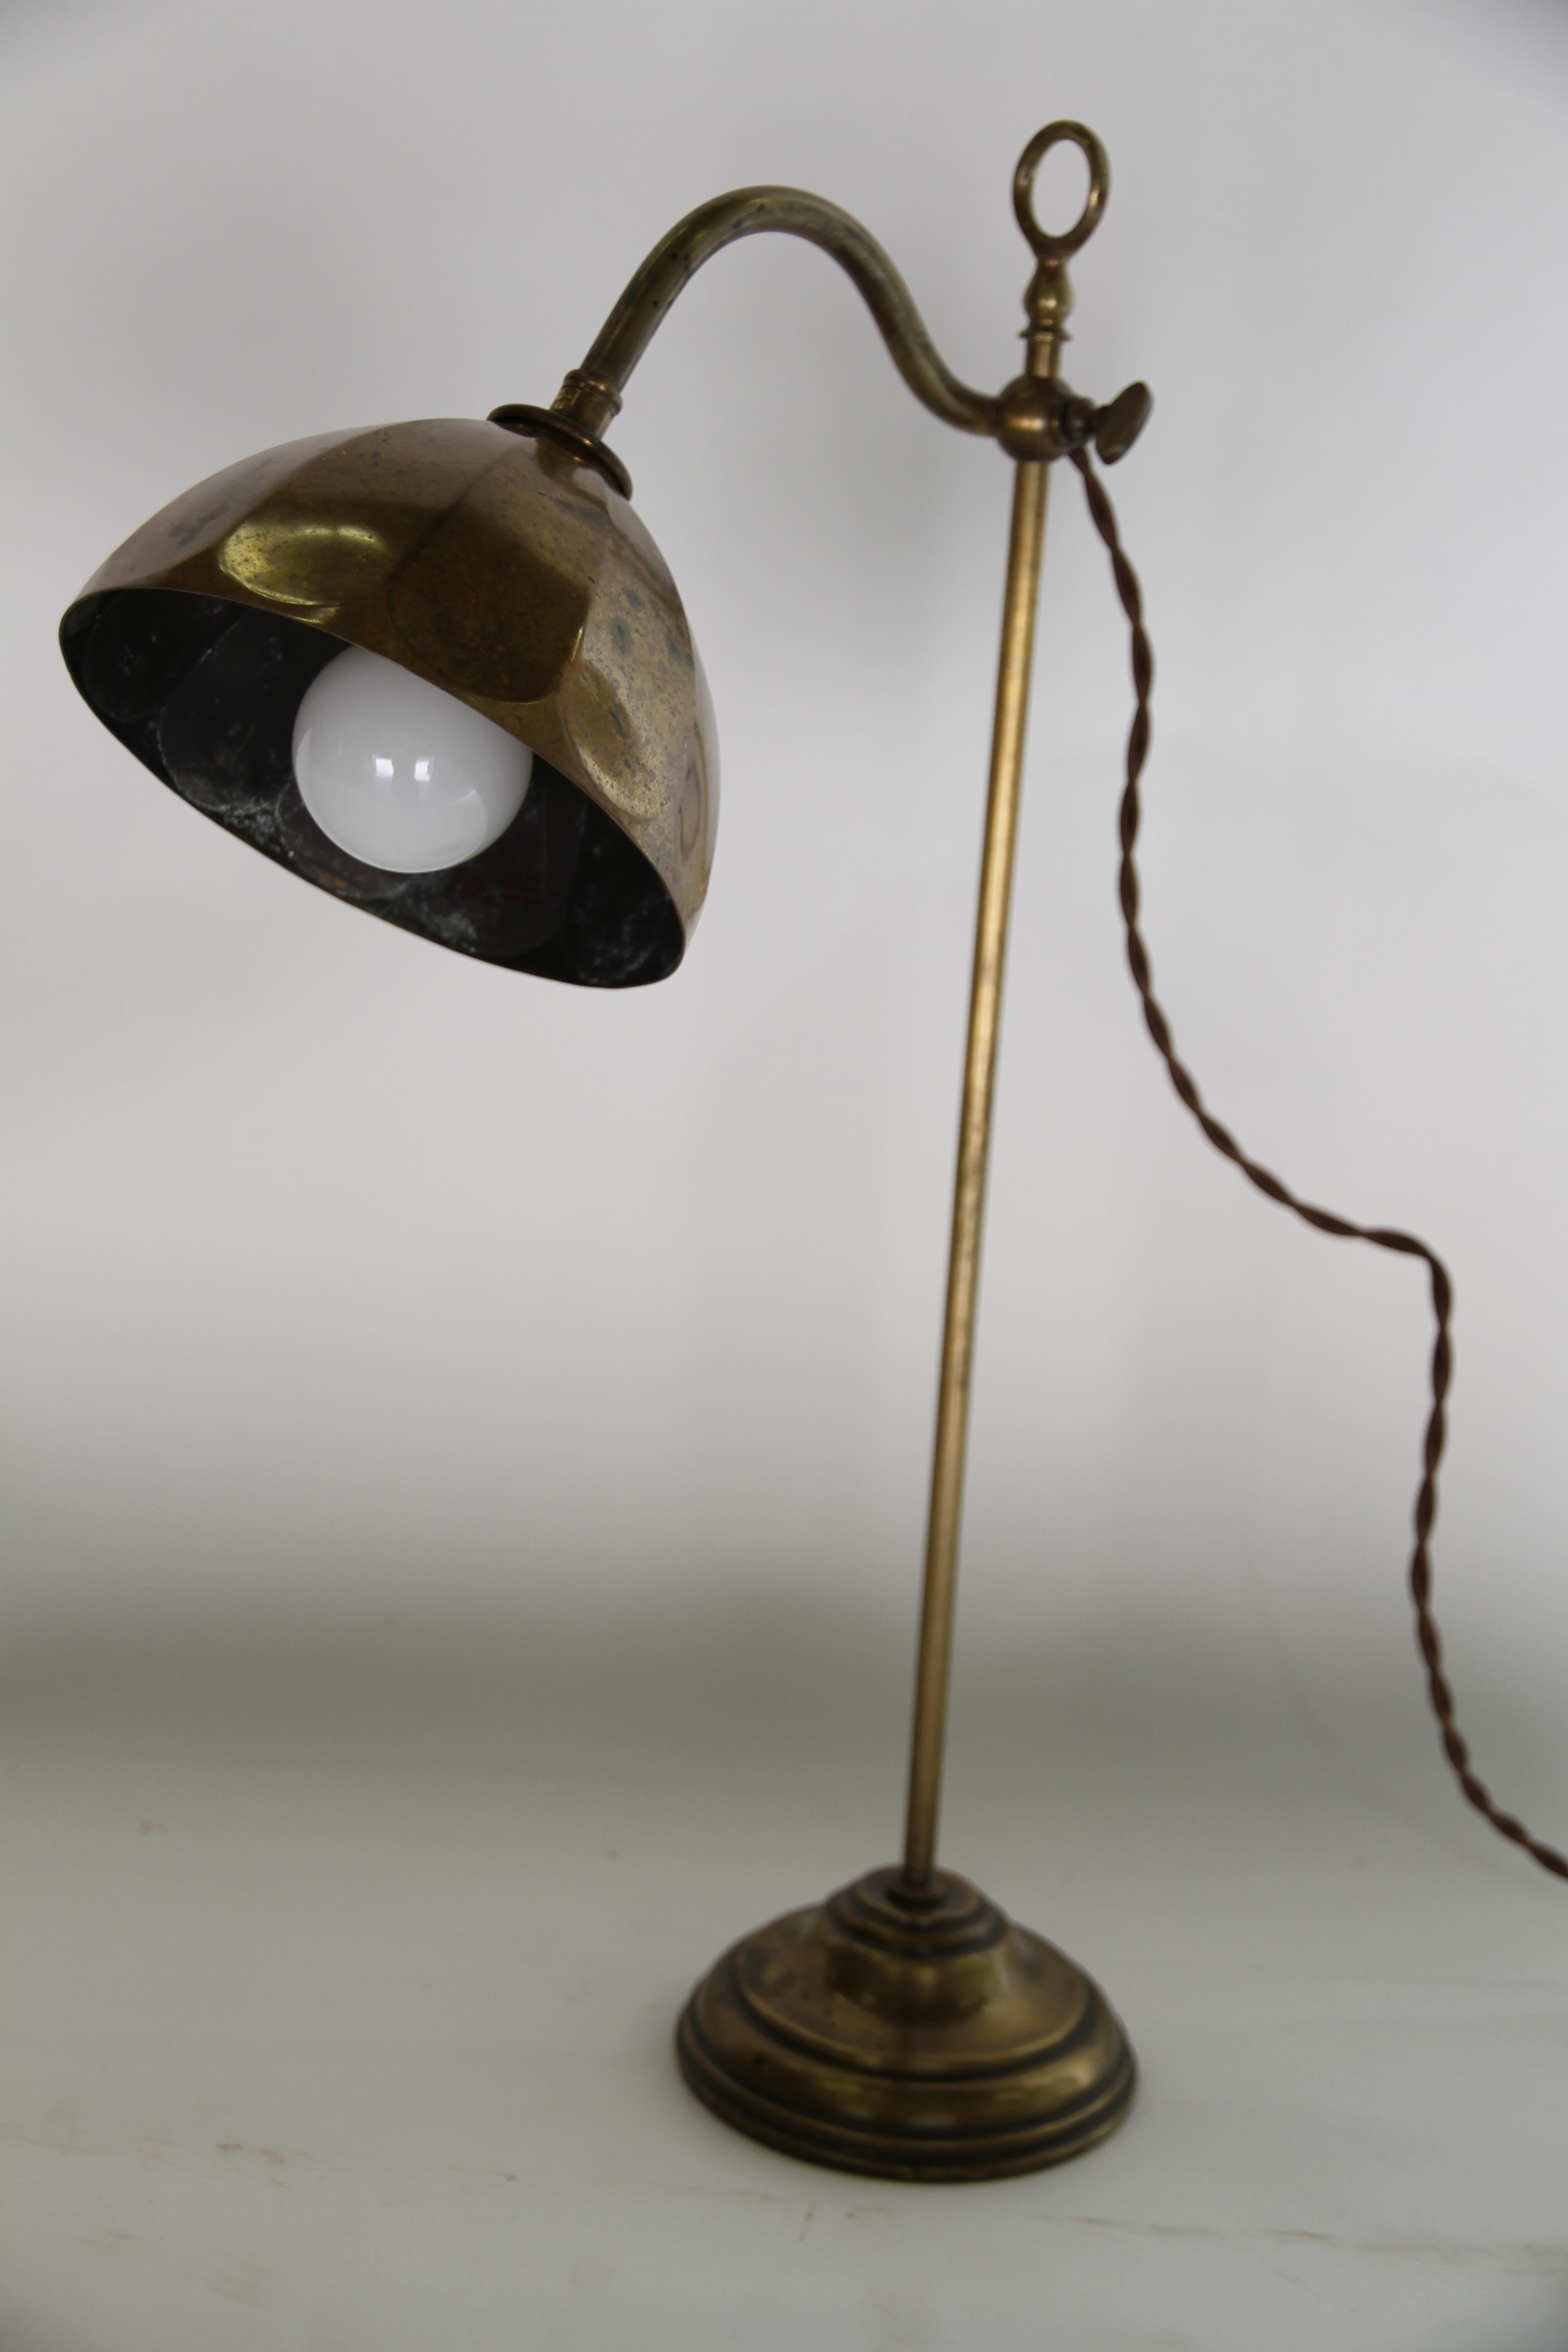 A lovely antique French brass lamp. This lamp has been newly wired to U.S. standards, the arm of the lamp is adjustable, up and the pole with a slide mechanism. Perfect as a desk or reading lamp.